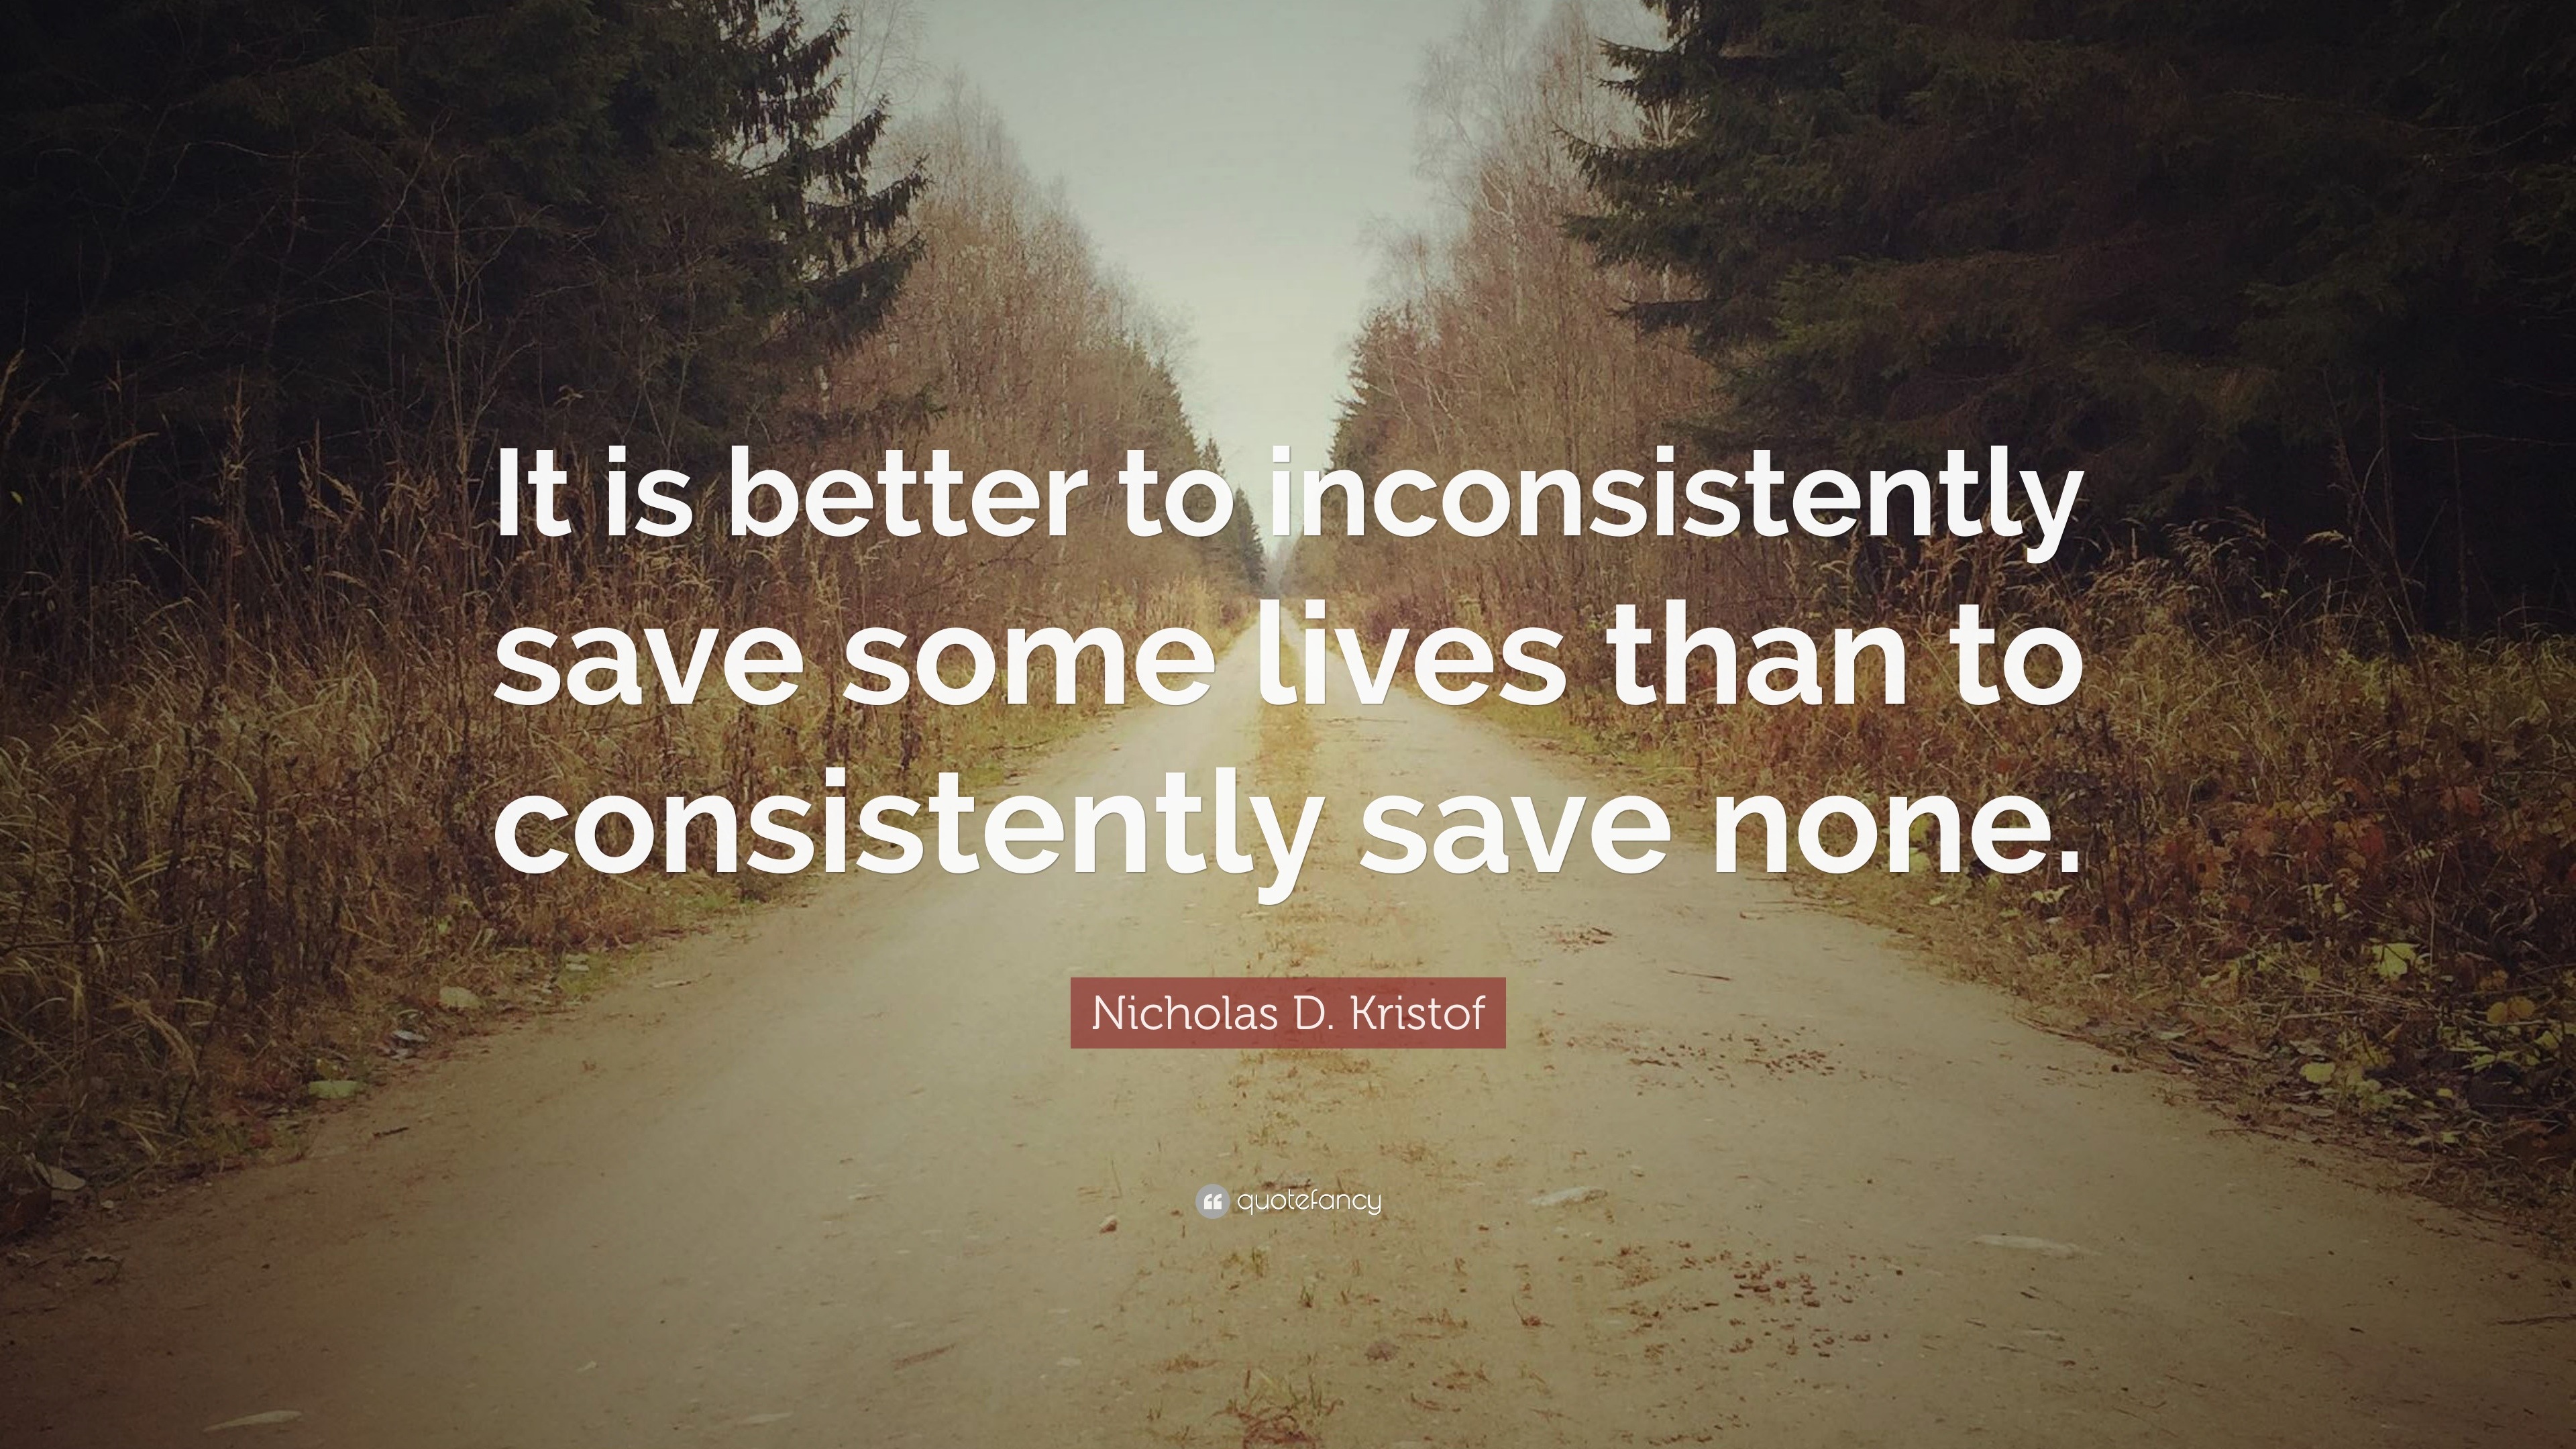 Nicholas D Kristof Quote It Is Better To Inconsistently Save